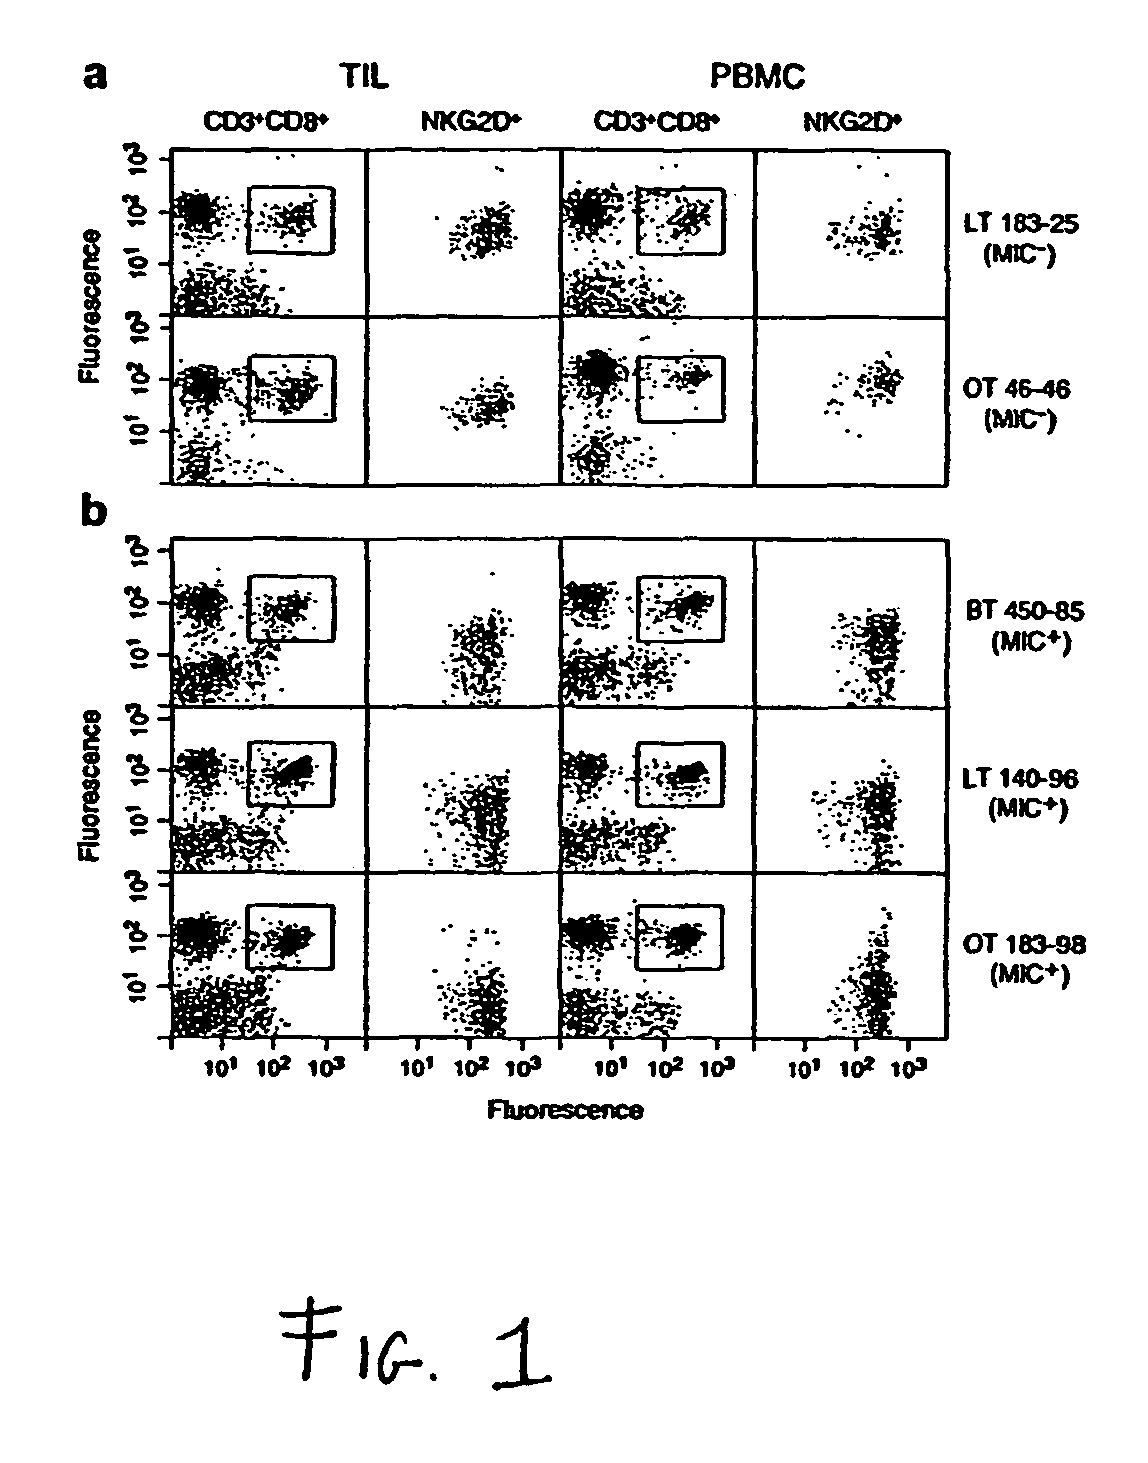 Soluble MIC polypeptides as markers for diagnosis, prognosis and treatment of cancer and autoimmune diseases or conditions